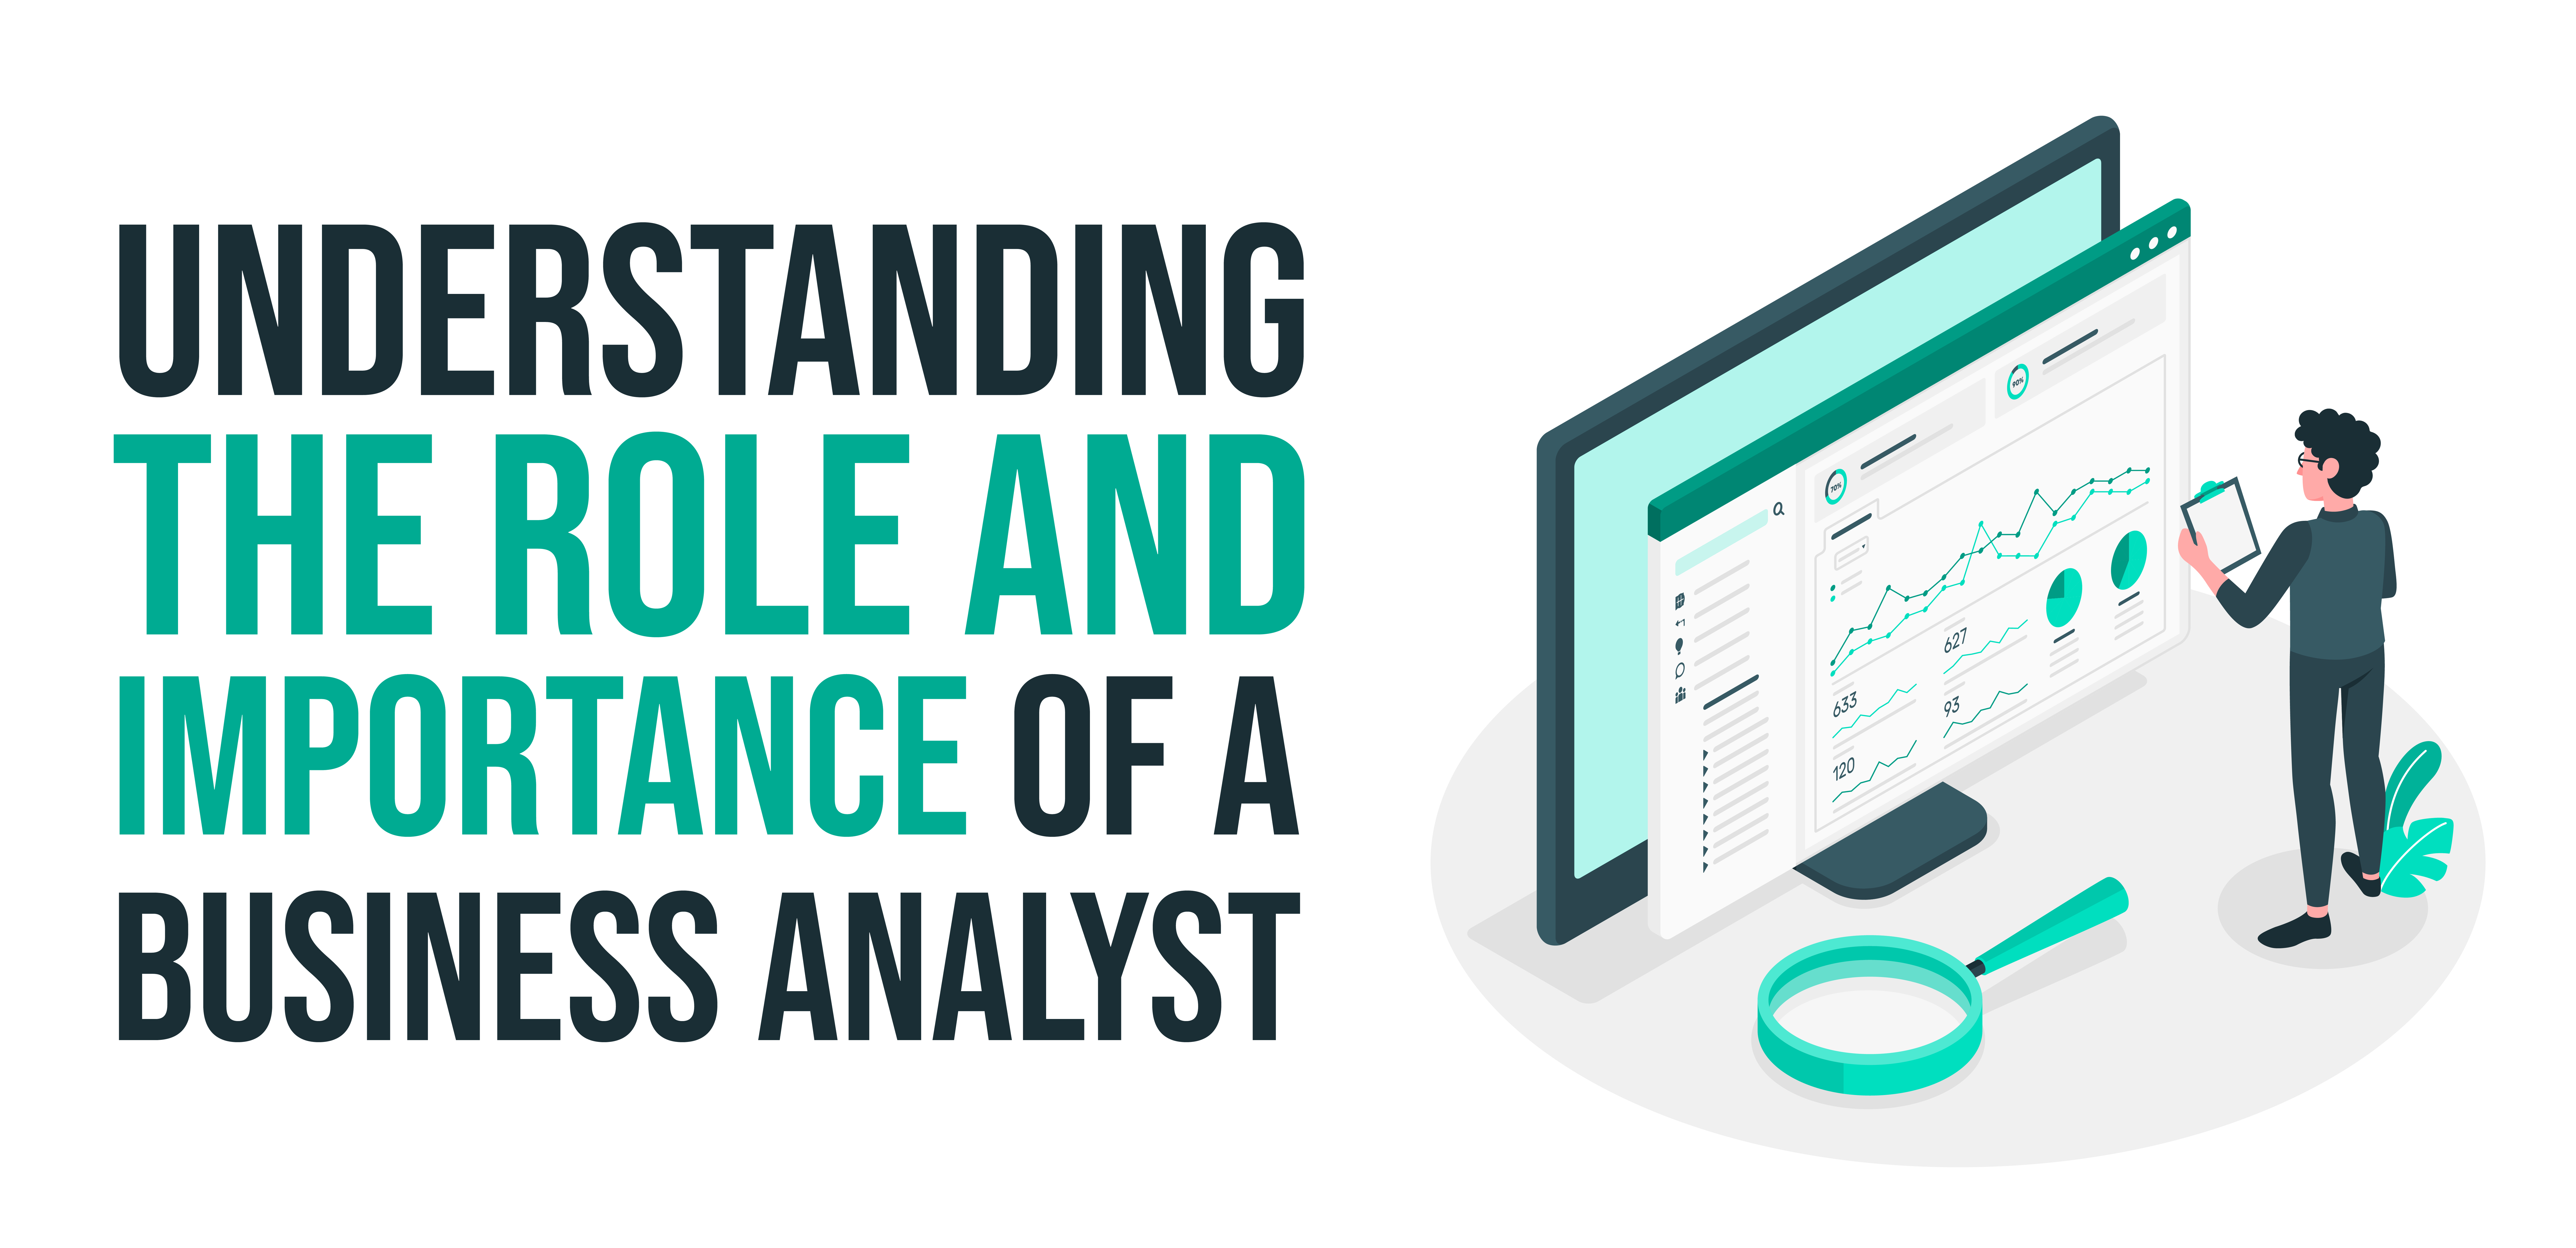 Role And Importance Of A Business Analyst